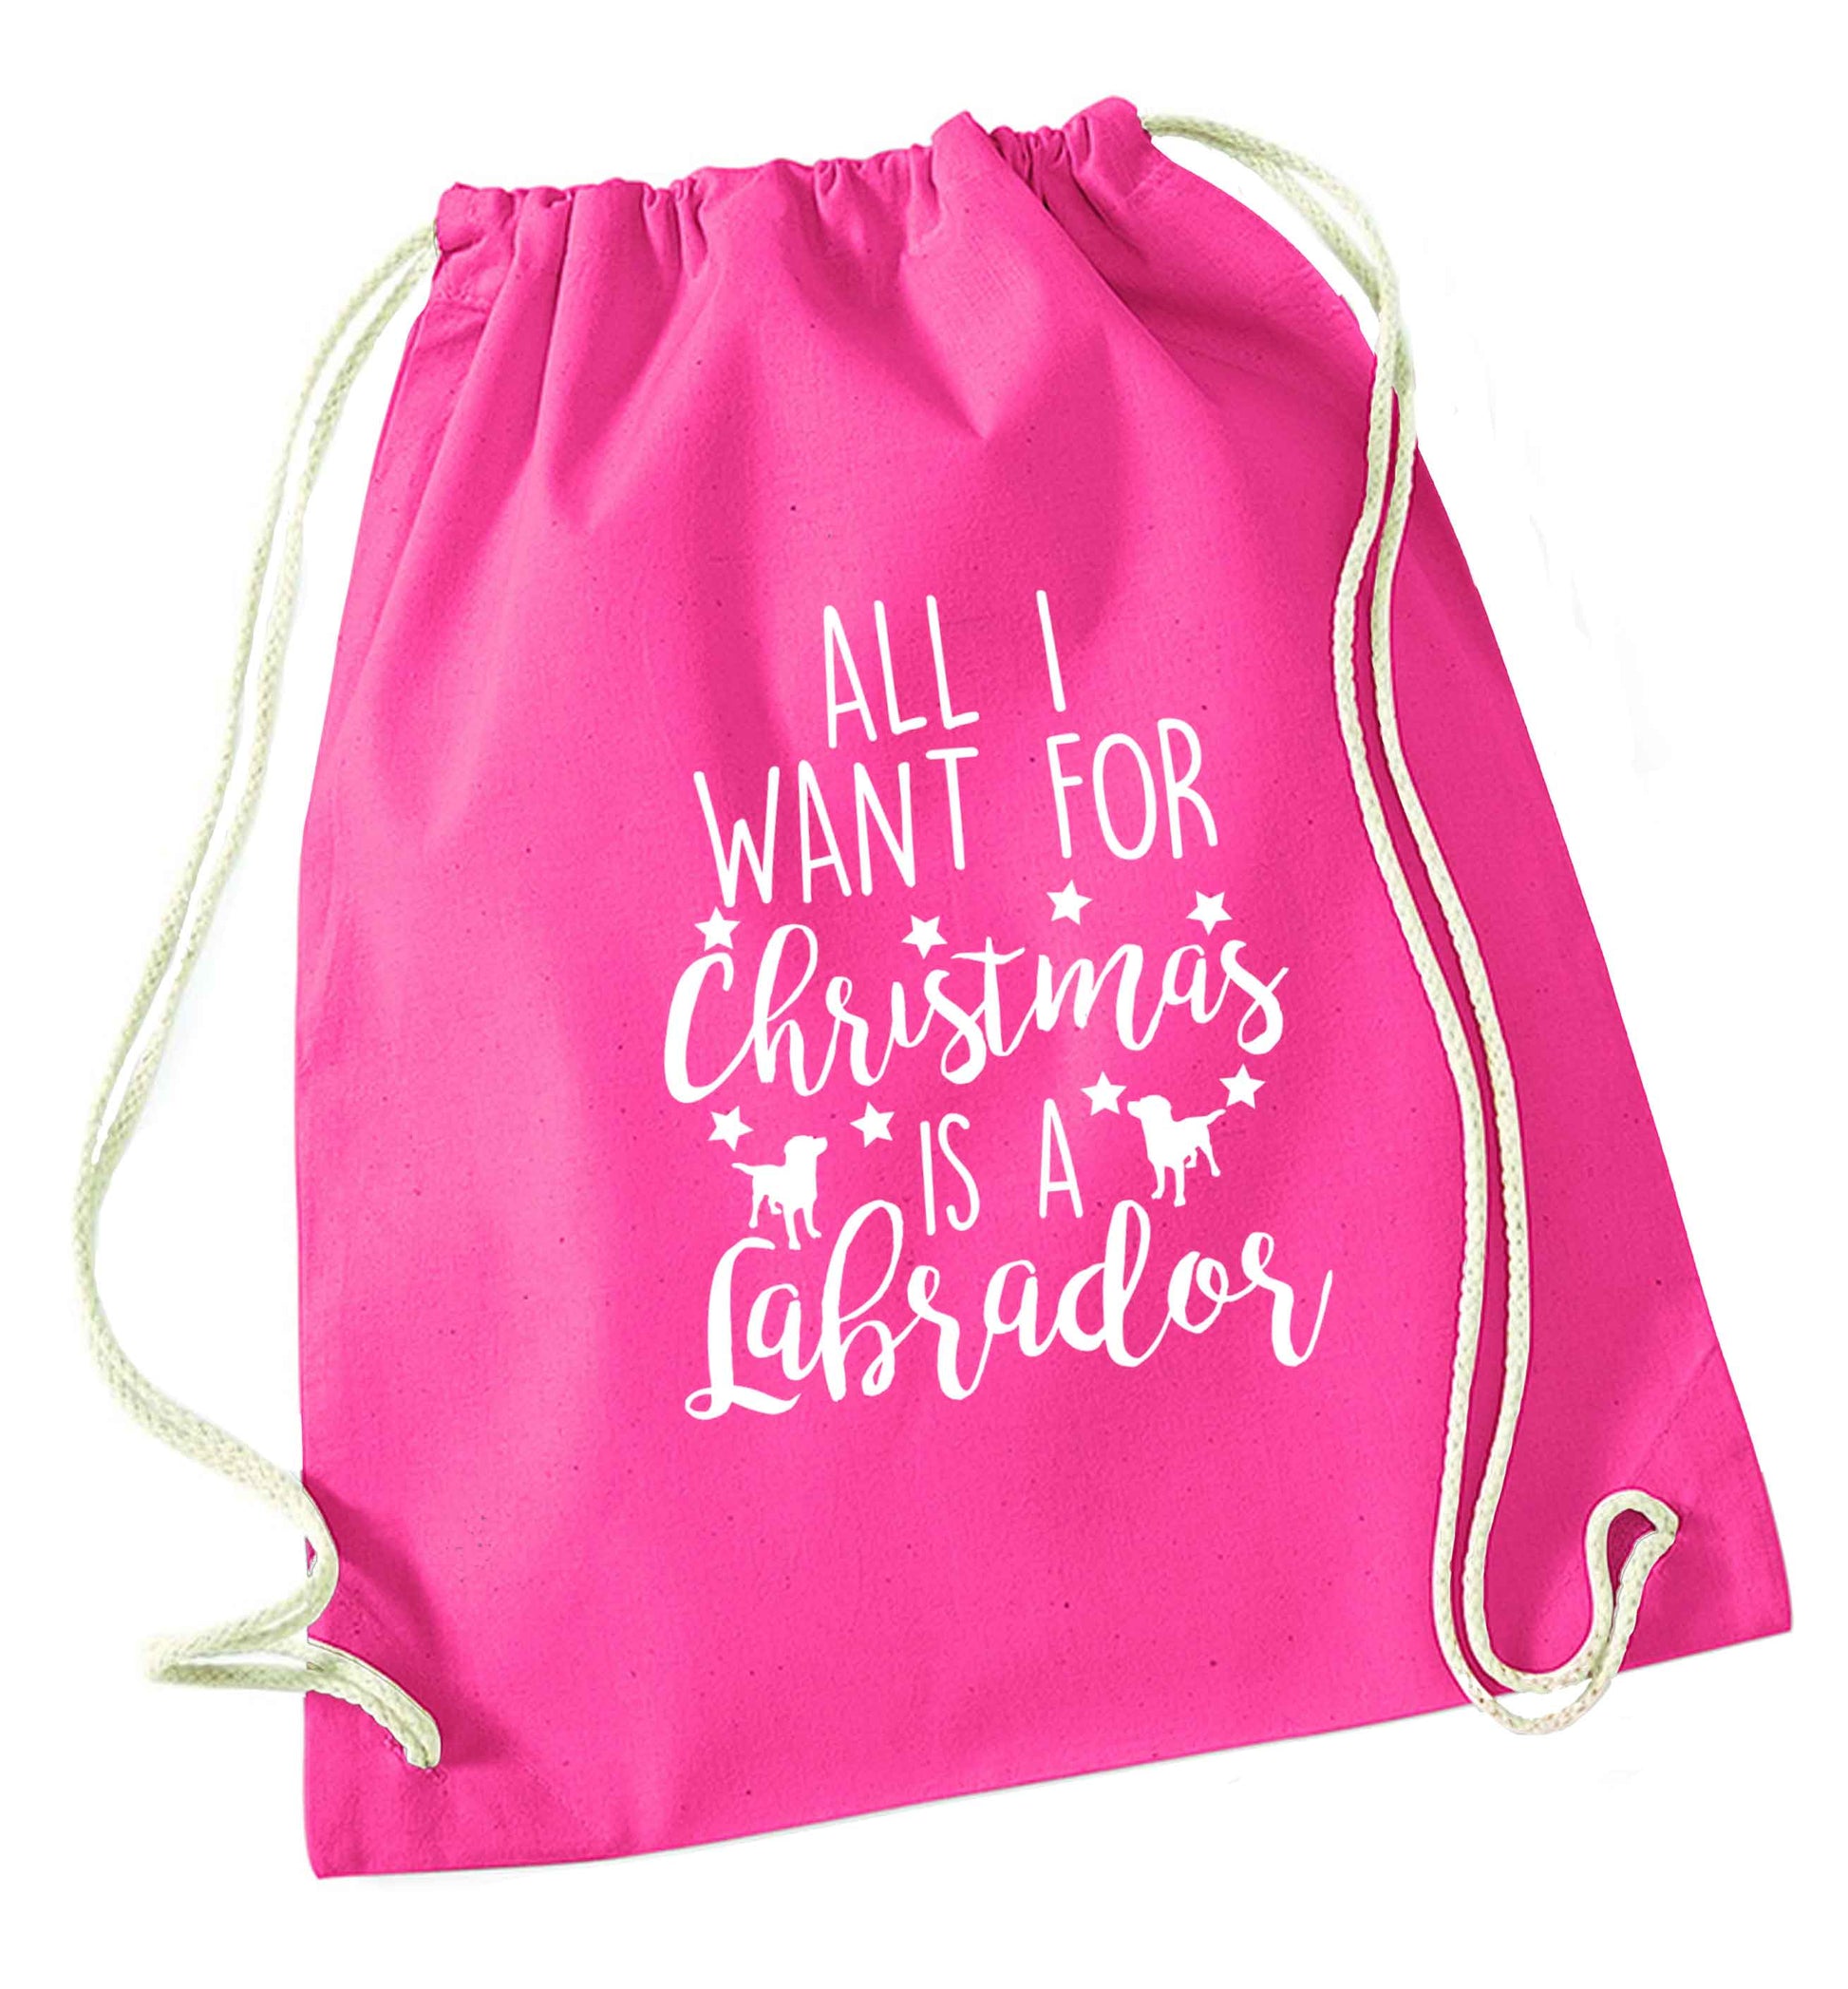 All I want for Christmas is a labrador pink drawstring bag